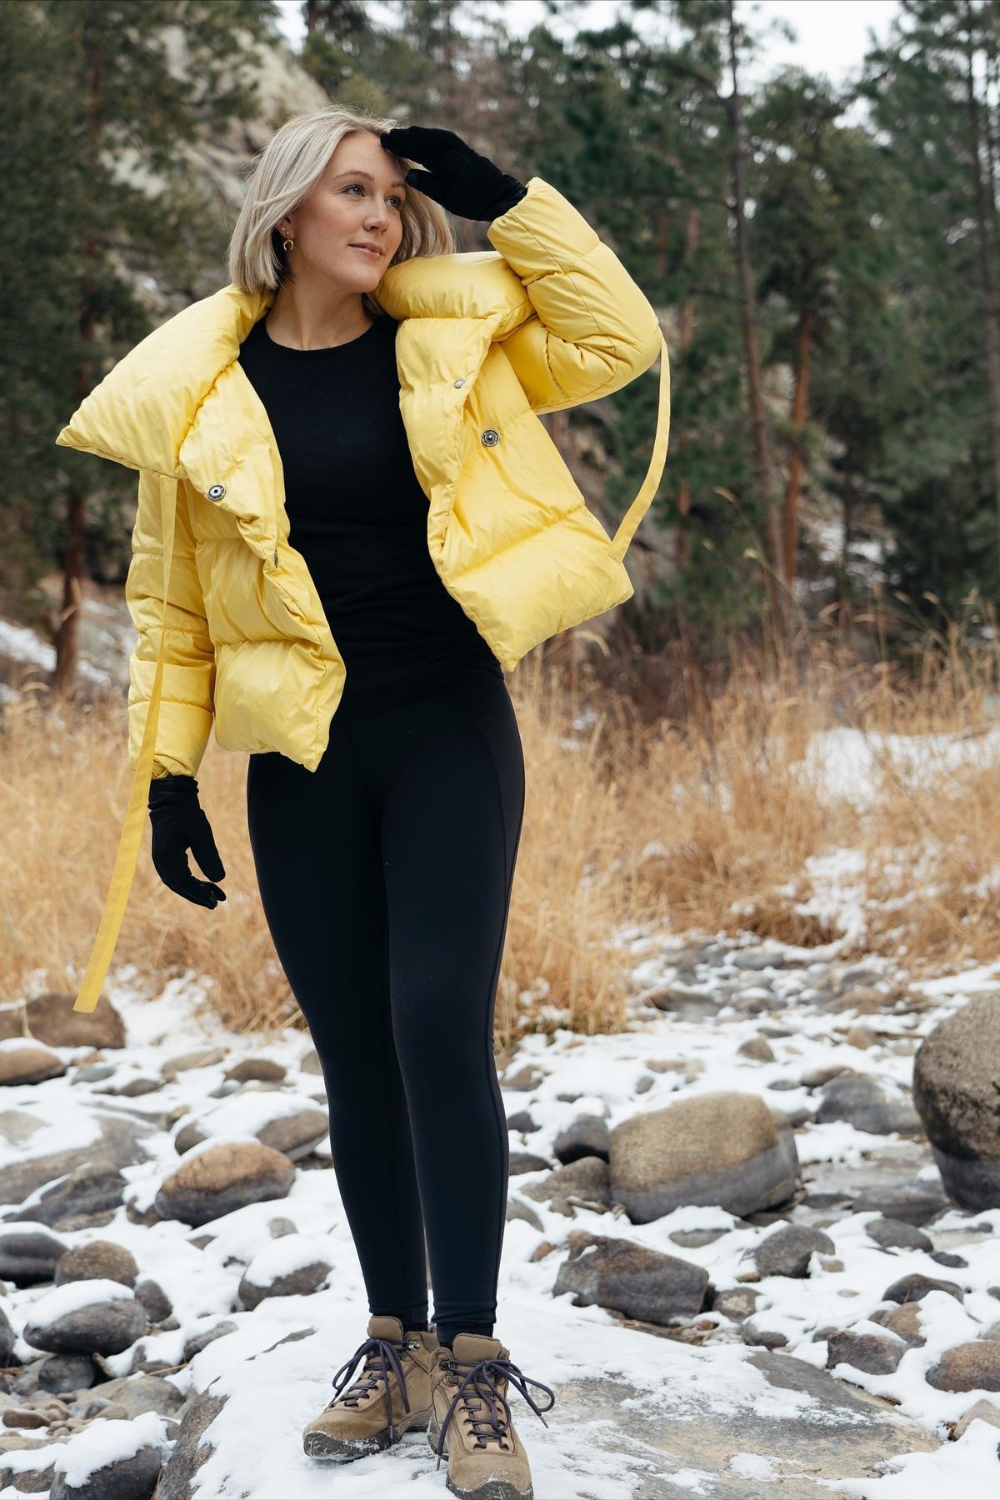 Cute hiking outfit idea with puffer jacket and leggings